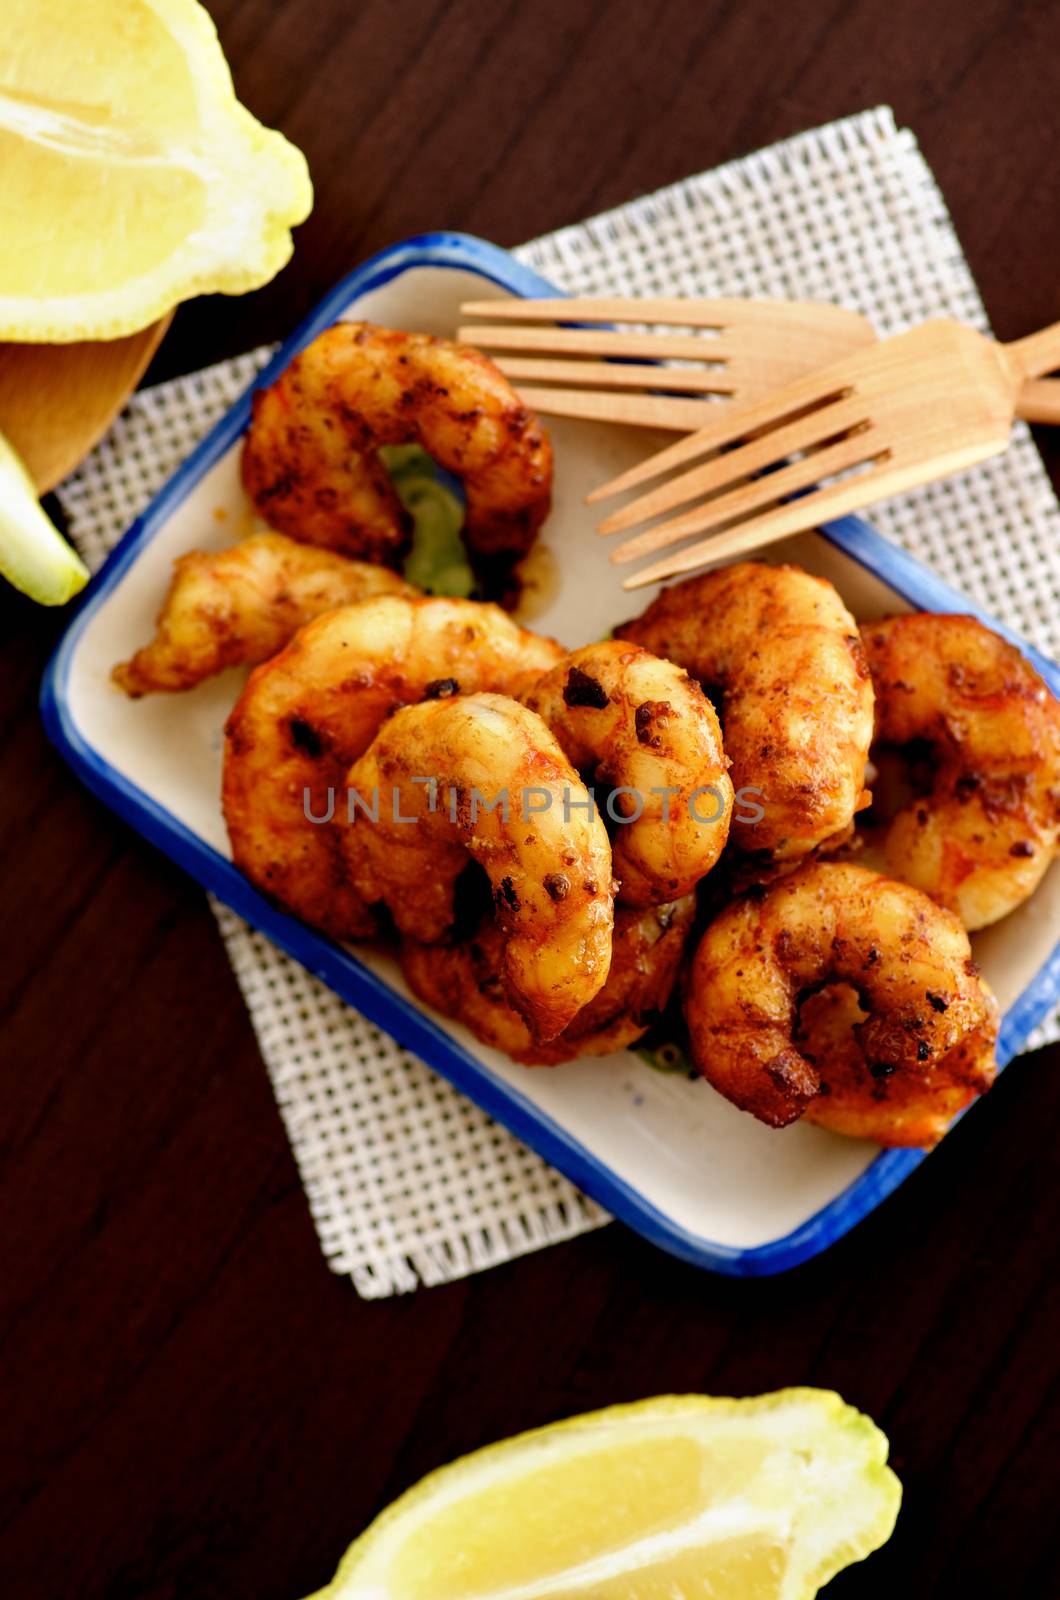 Top View of Delicious Grilled Prawns on Small Plate with Sliced Lemon and Wooden Forks closeup on Wooden Cutting Board. Selective Focus